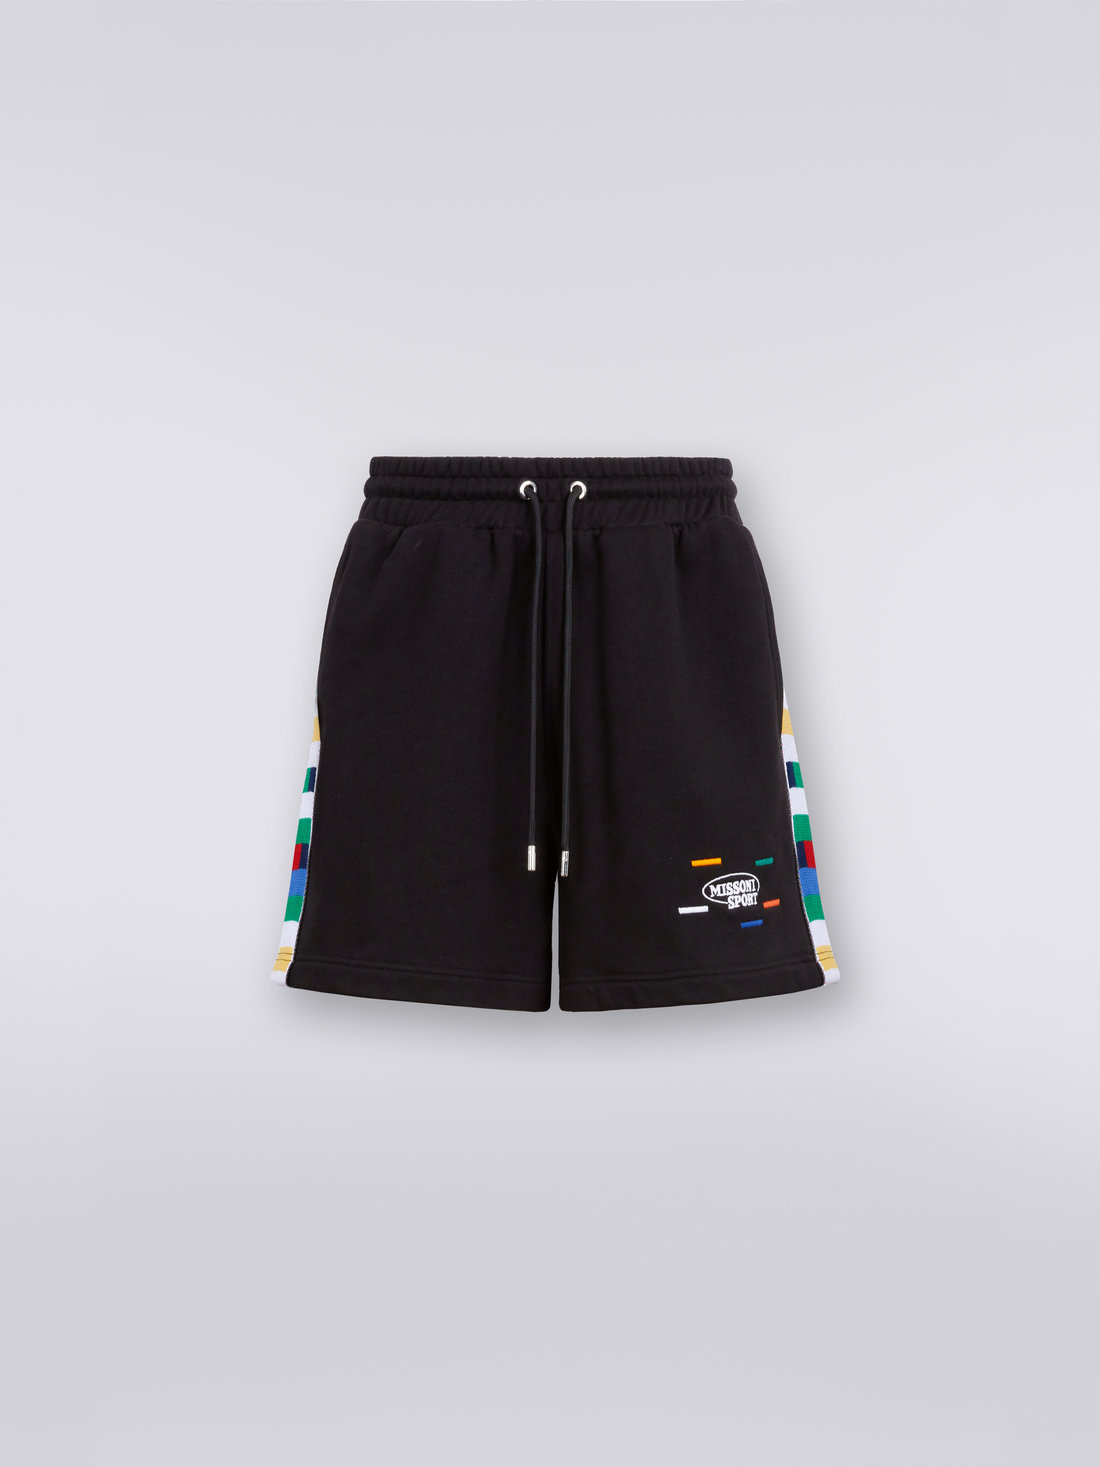 Cotton and viscose jersey shorts with knitted bands, Black & Multicoloured - UC23SI02BJ00EQS91E5 - 0